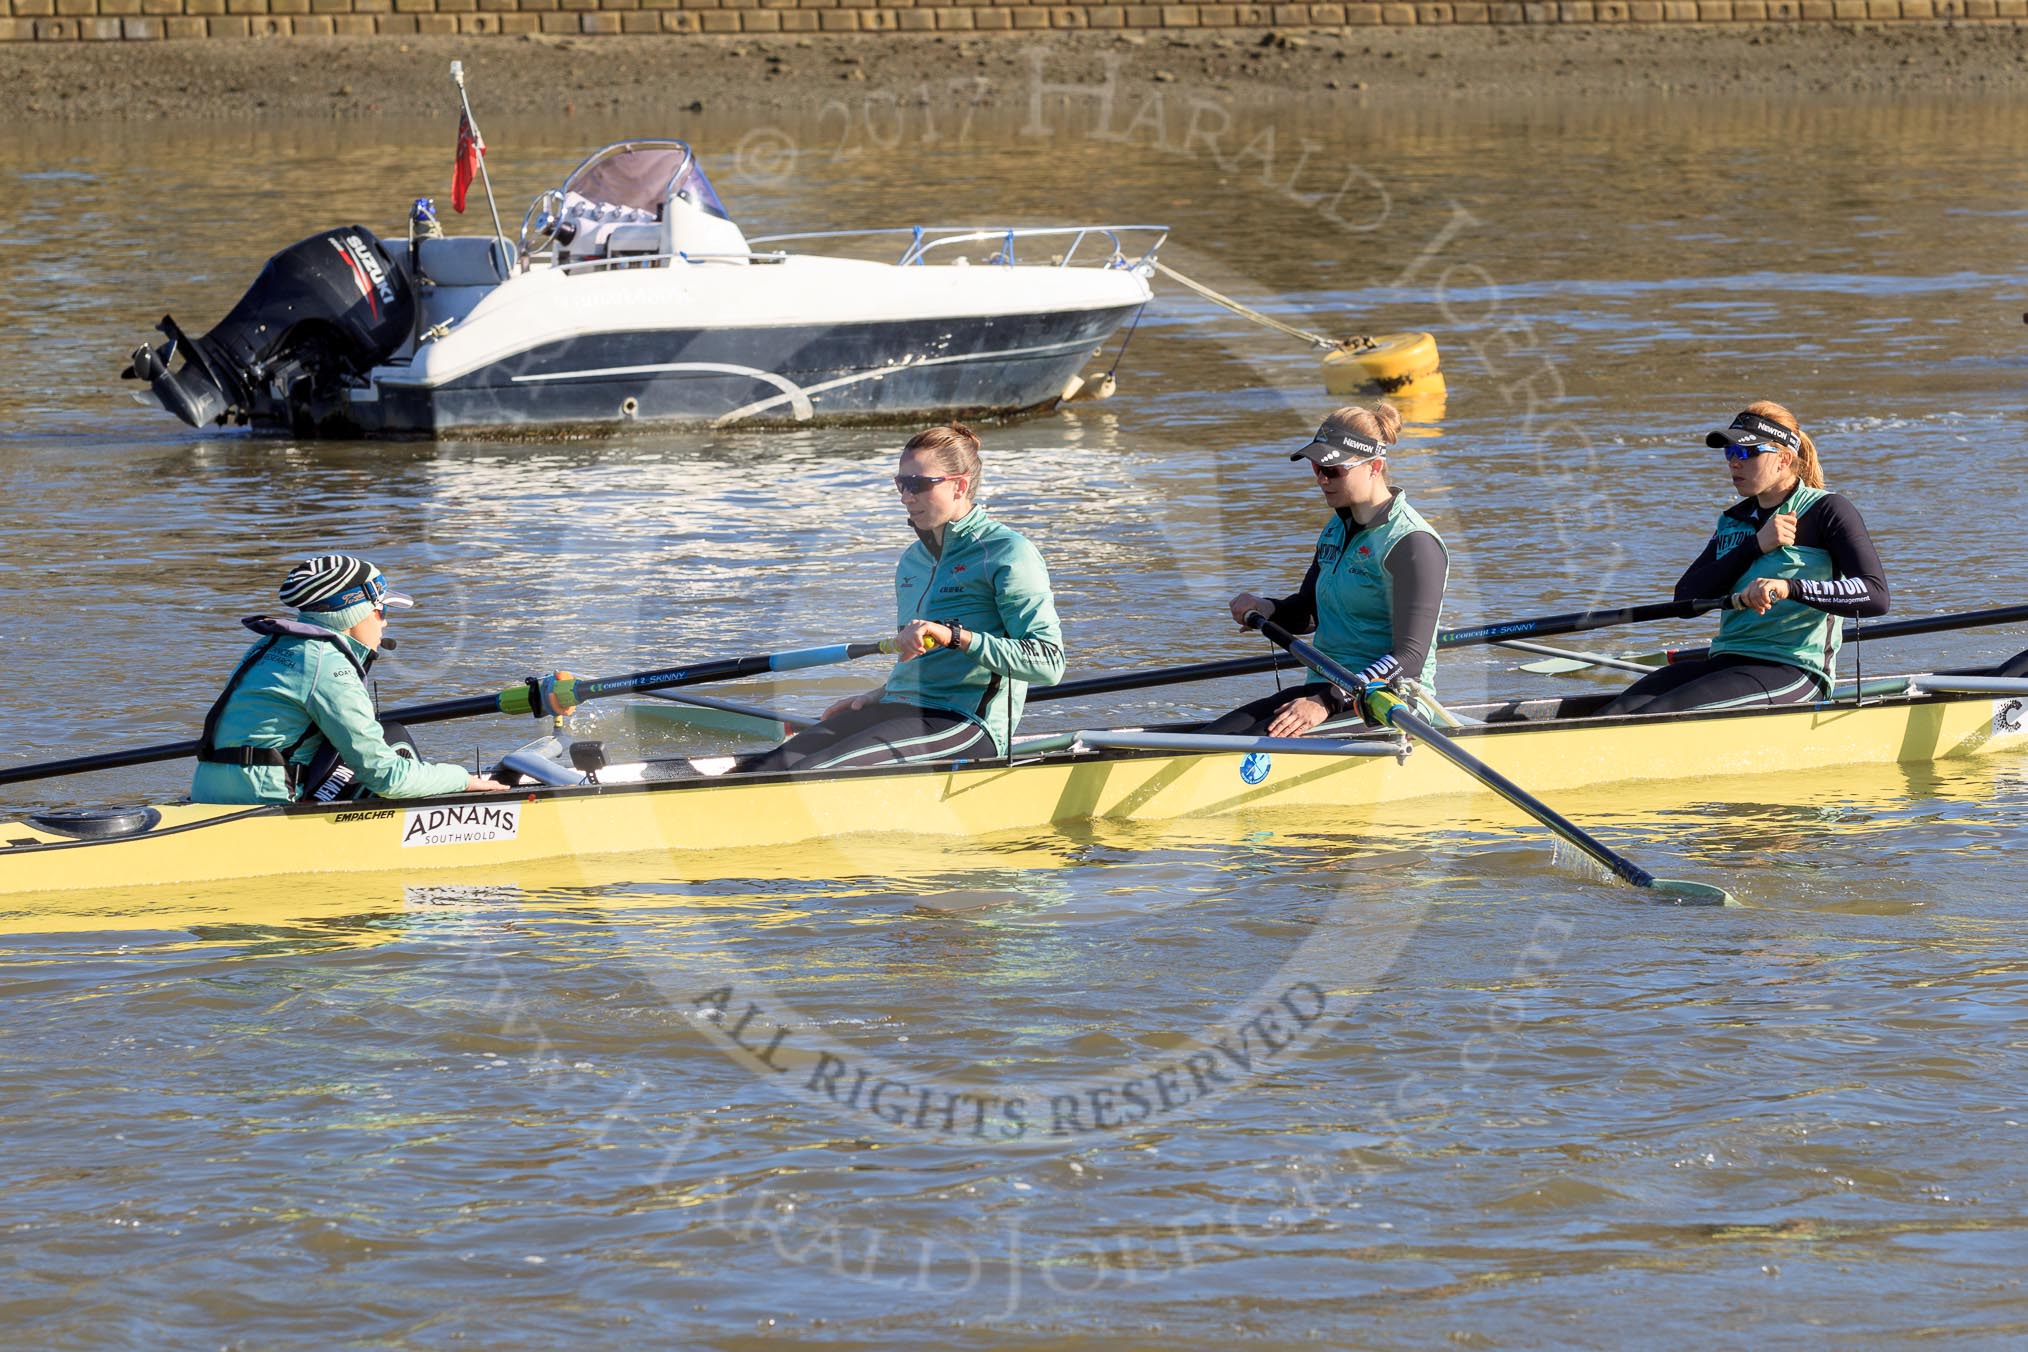 The Women's Boat Race season 2018 - fixture CUWBC vs. ULBC: CUWBC on the way to Putney Bridge, before the race - cox Sophie Shapter, stroke Tricia Smith, 7 Imogen Grant, 6 Anne Beenken.
River Thames between Putney Bridge and Mortlake,
London SW15,

United Kingdom,
on 17 February 2018 at 12:35, image #24